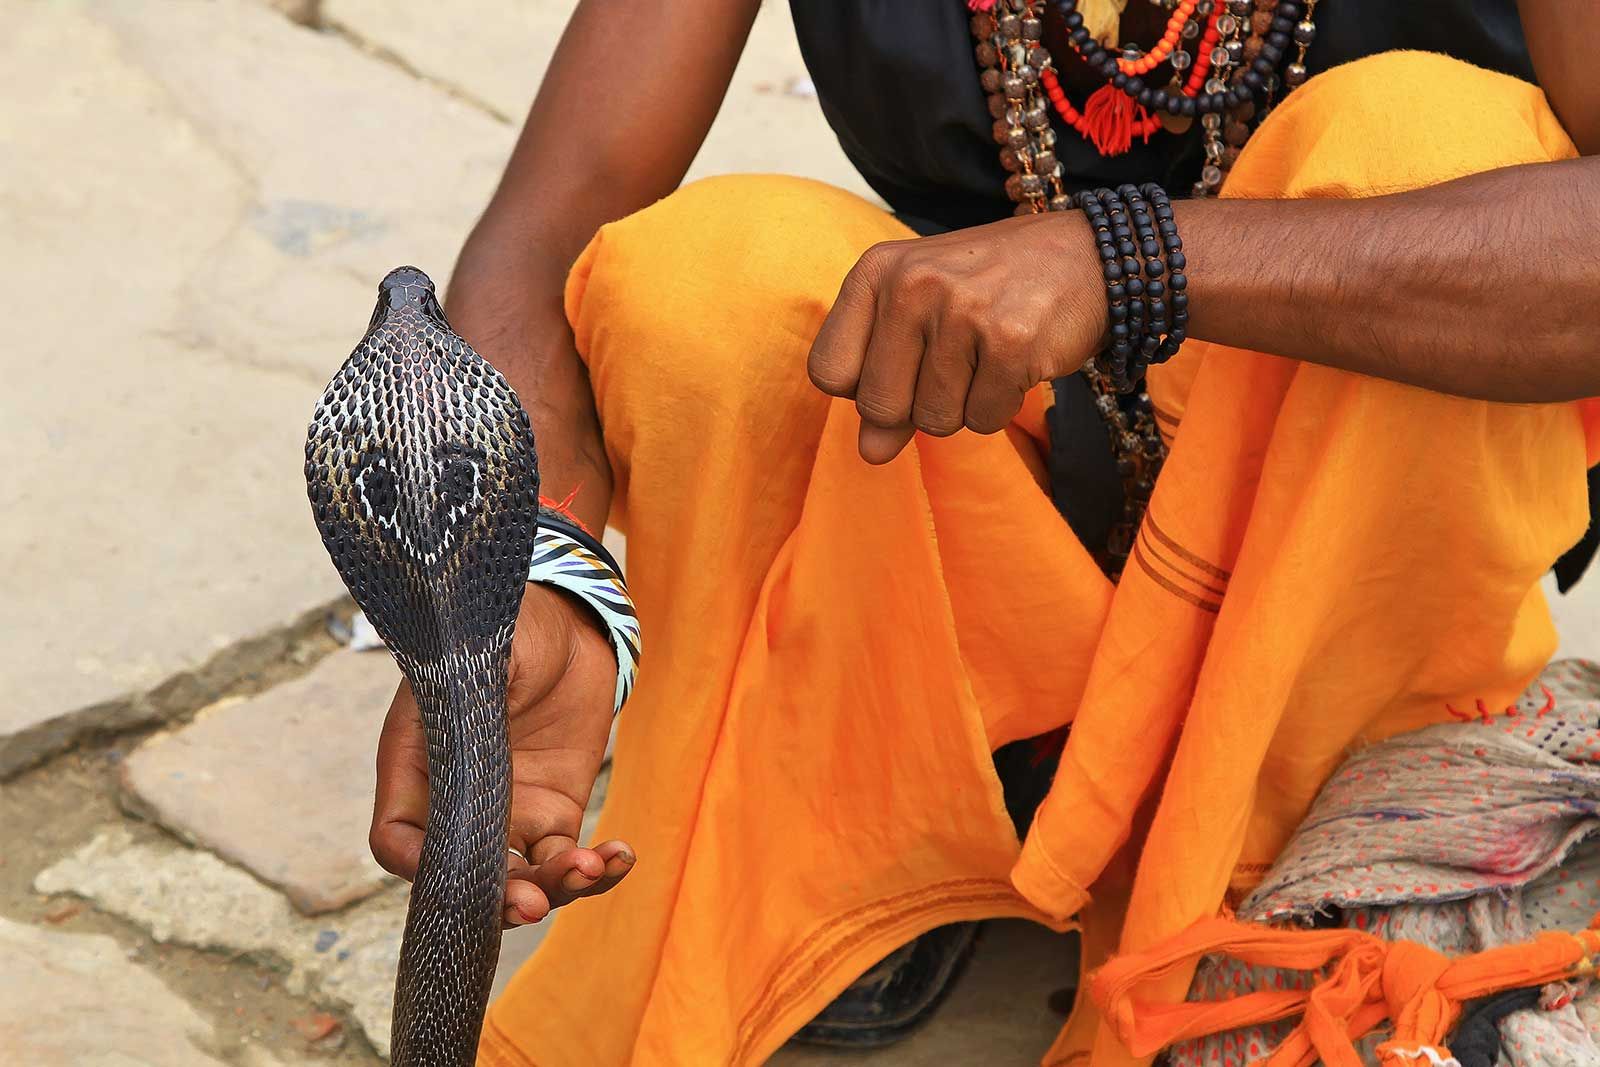 A snake charmer playing with an Indian Cobra in Varanasi. Snake charming is the practice of pretending to hypnotise a snake by playing an instrument called "pungi". Although snakes are able to sense sound, they lack the outer ear that would enable them to hear the music. They follow the pungi that the snake charmer holds with their heads. The snake considers the person and pungi a threat and responds to it as if it were a predator.